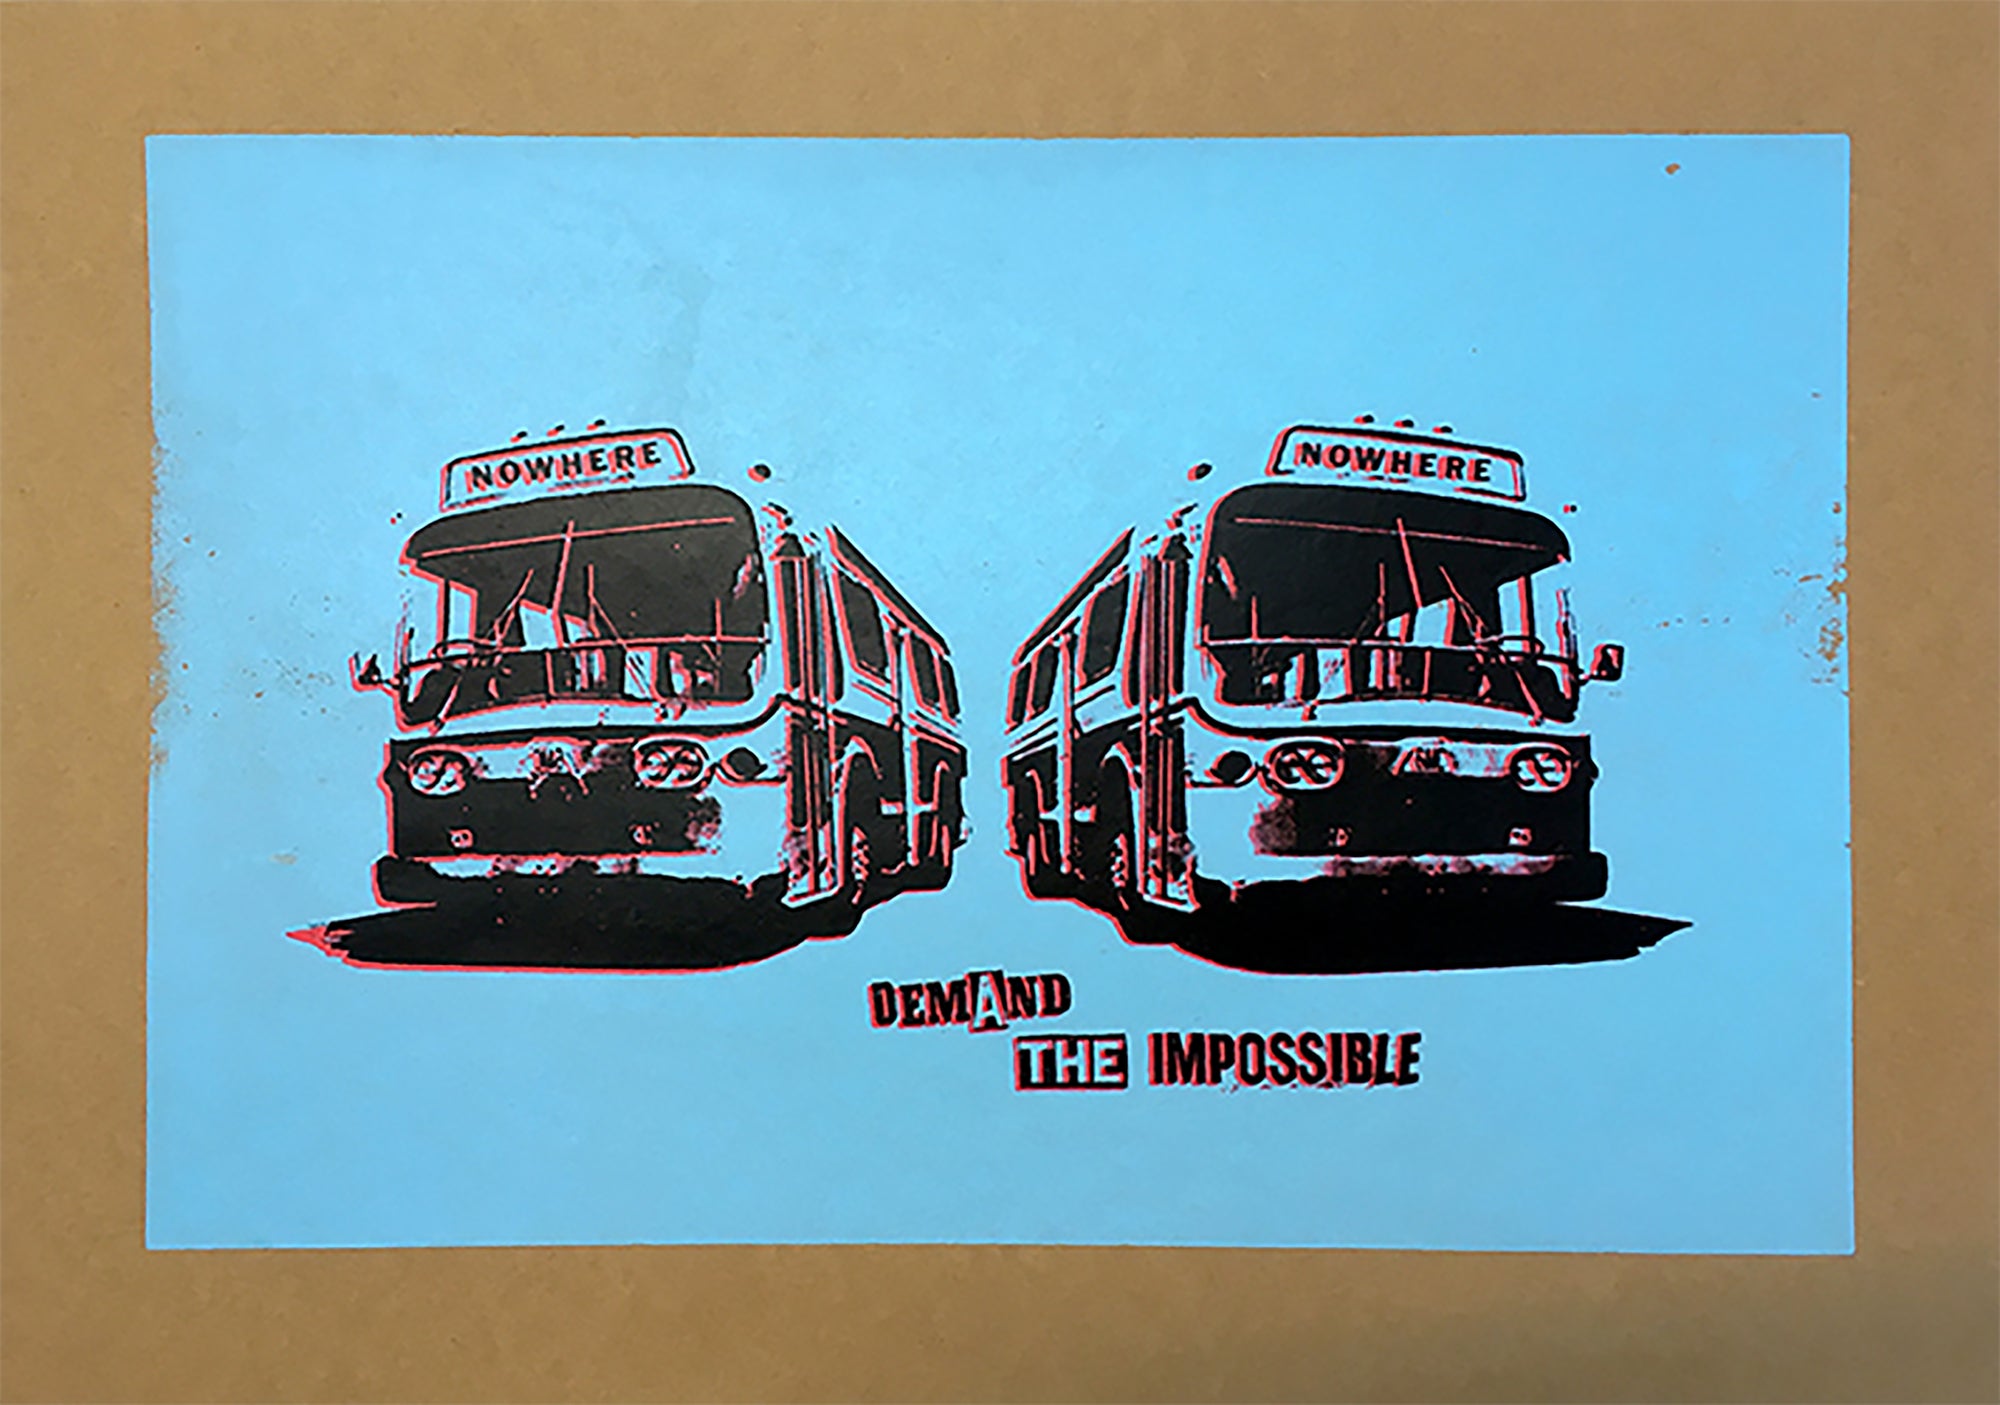 Jamie Reid - Demand The Impossible (Nowhere Buses - Blue)